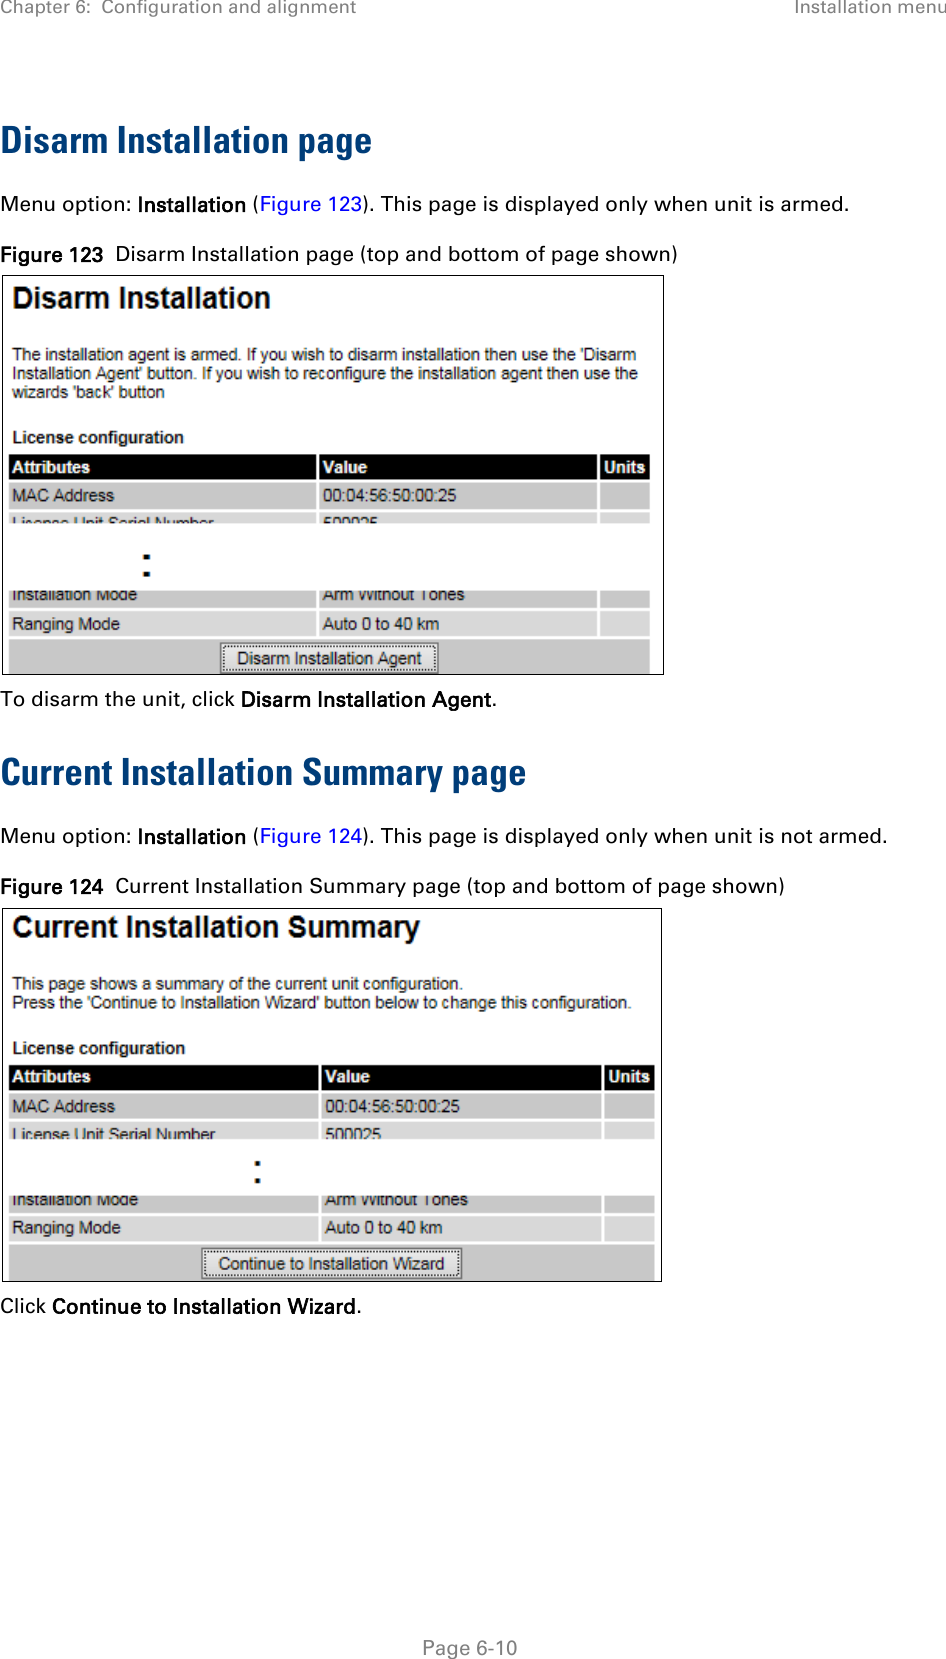 Chapter 6:  Configuration and alignment Installation menu  Disarm Installation page Menu option: Installation (Figure 123). This page is displayed only when unit is armed. Figure 123  Disarm Installation page (top and bottom of page shown)  To disarm the unit, click Disarm Installation Agent. Current Installation Summary page Menu option: Installation (Figure 124). This page is displayed only when unit is not armed.  Figure 124  Current Installation Summary page (top and bottom of page shown)  Click Continue to Installation Wizard.  Page 6-10 